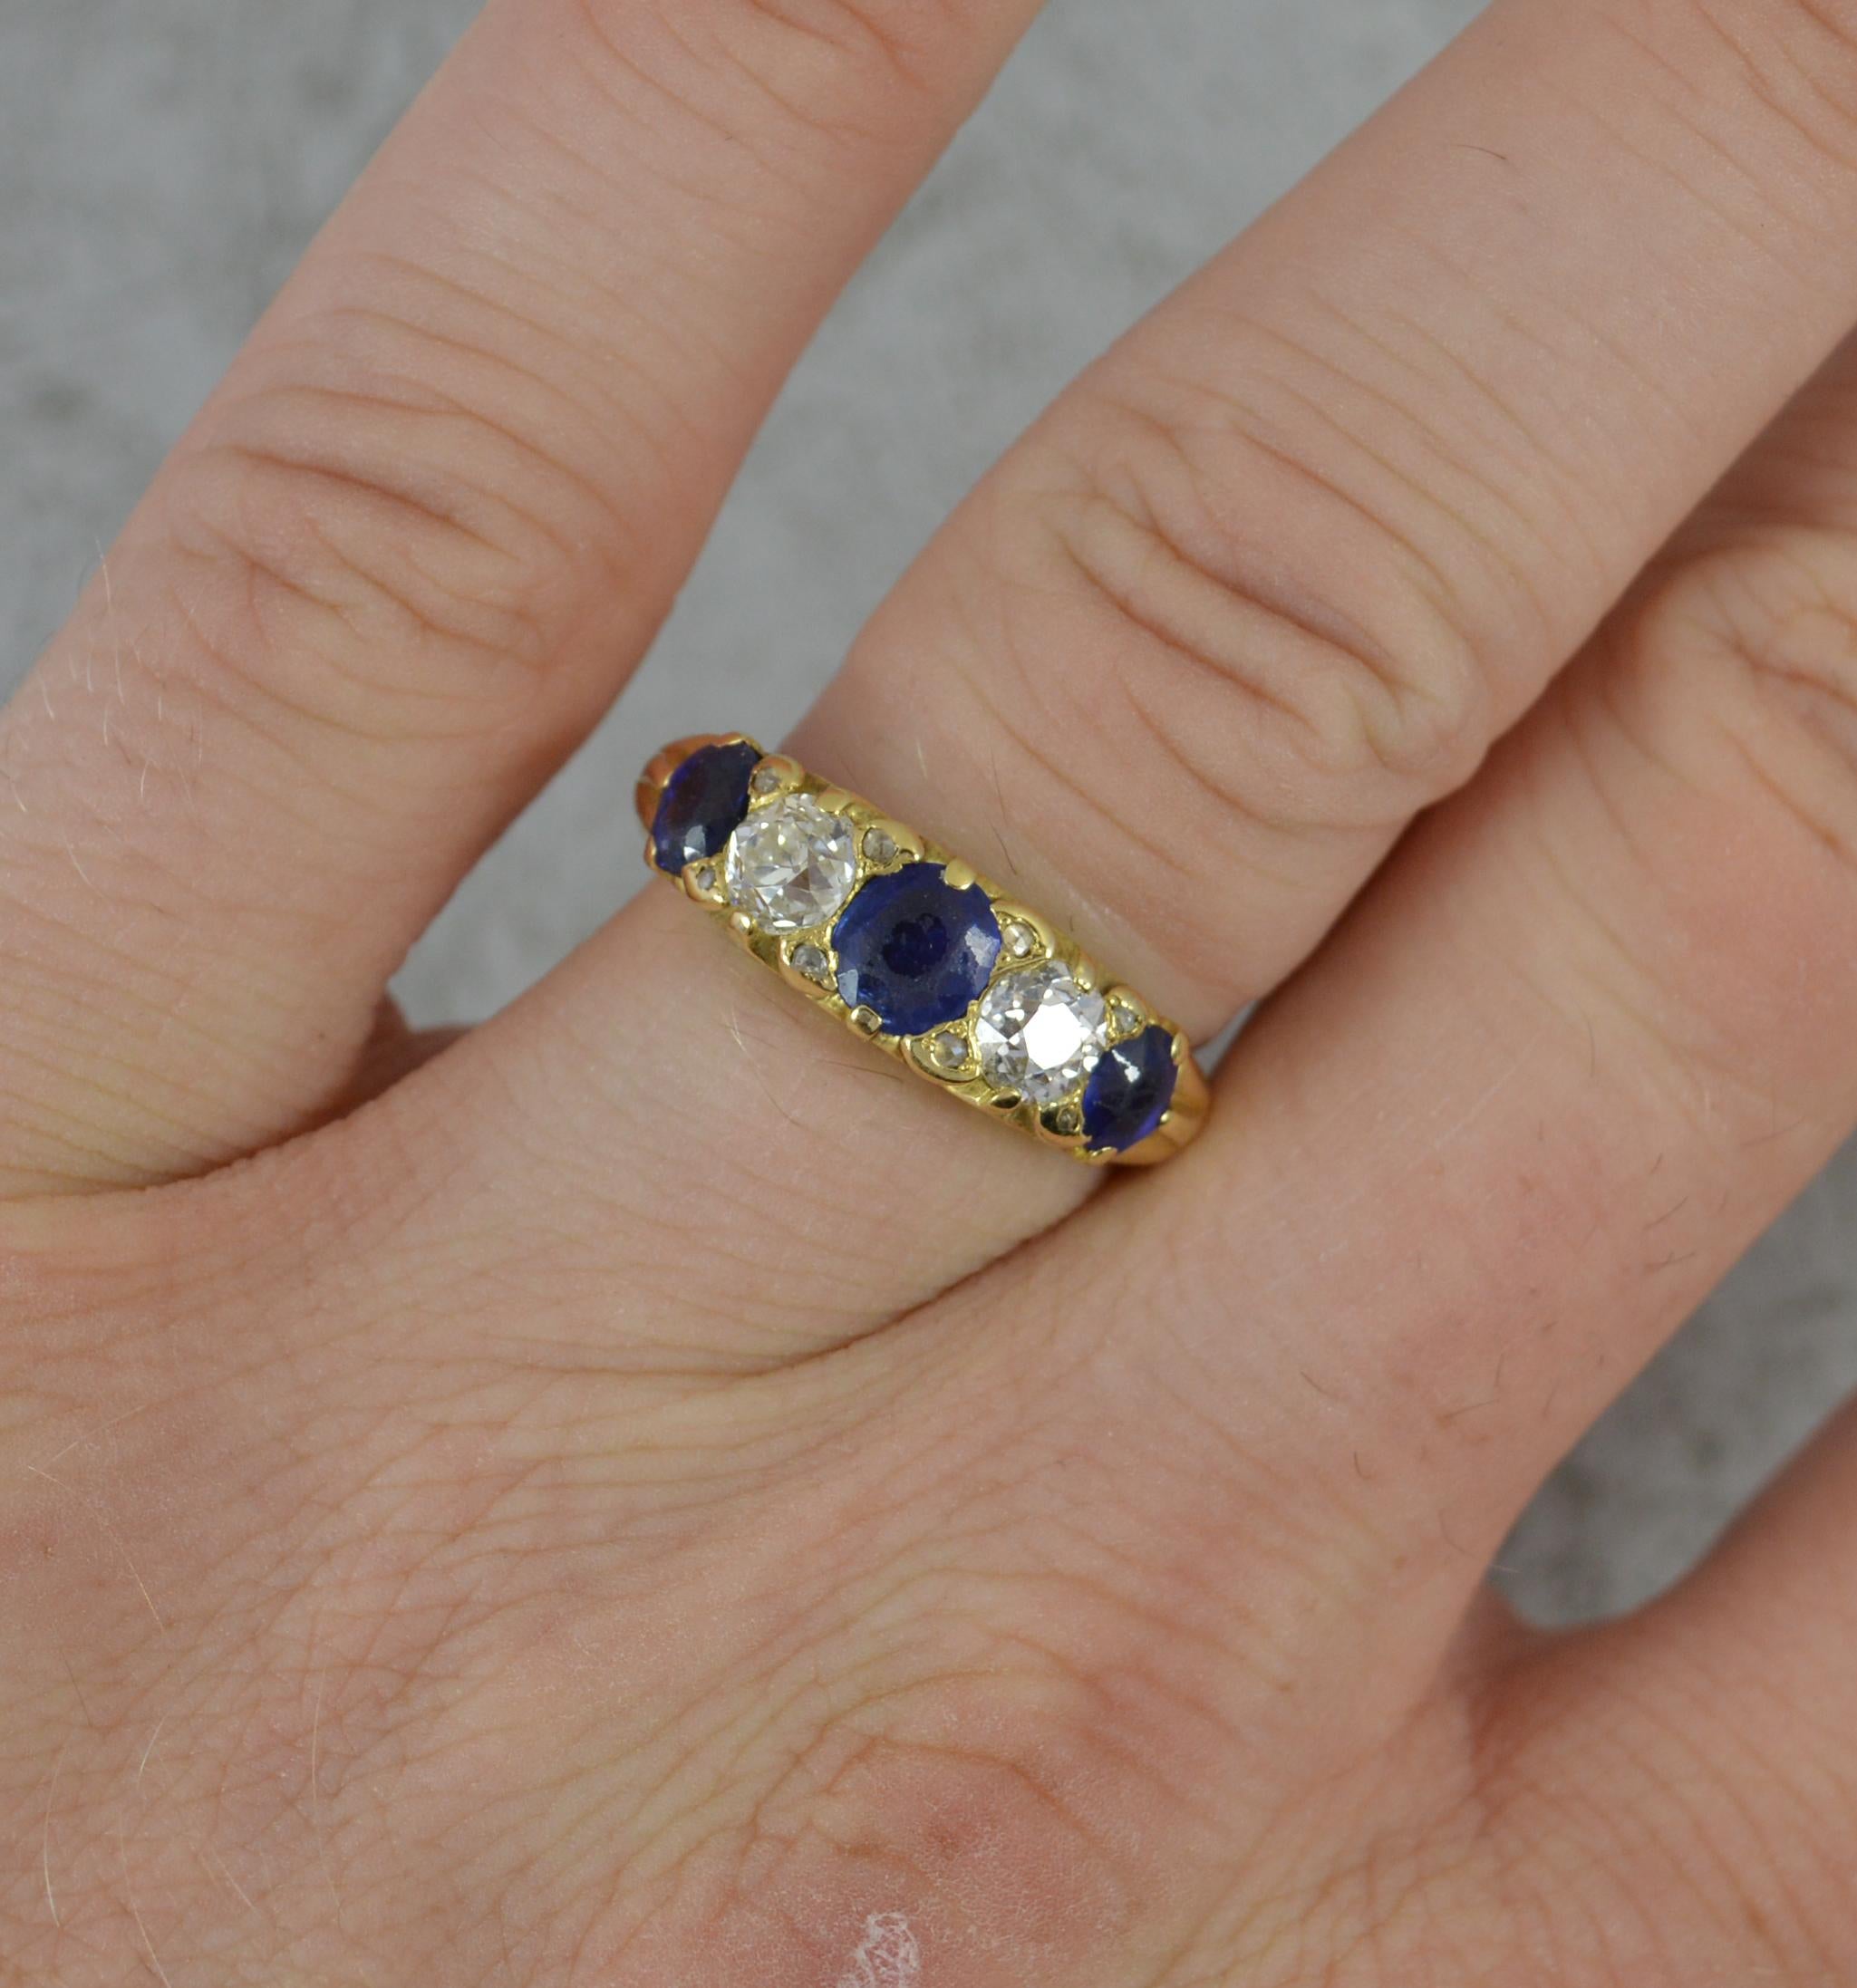 A fine 18 carat gold, sapphire diamond five stone ring. c1880.
18 carat yellow gold shank and setting with deep floral scroll work.
Designed with alternating natural blue sapphires and old European cut diamonds with additional small diamond chip